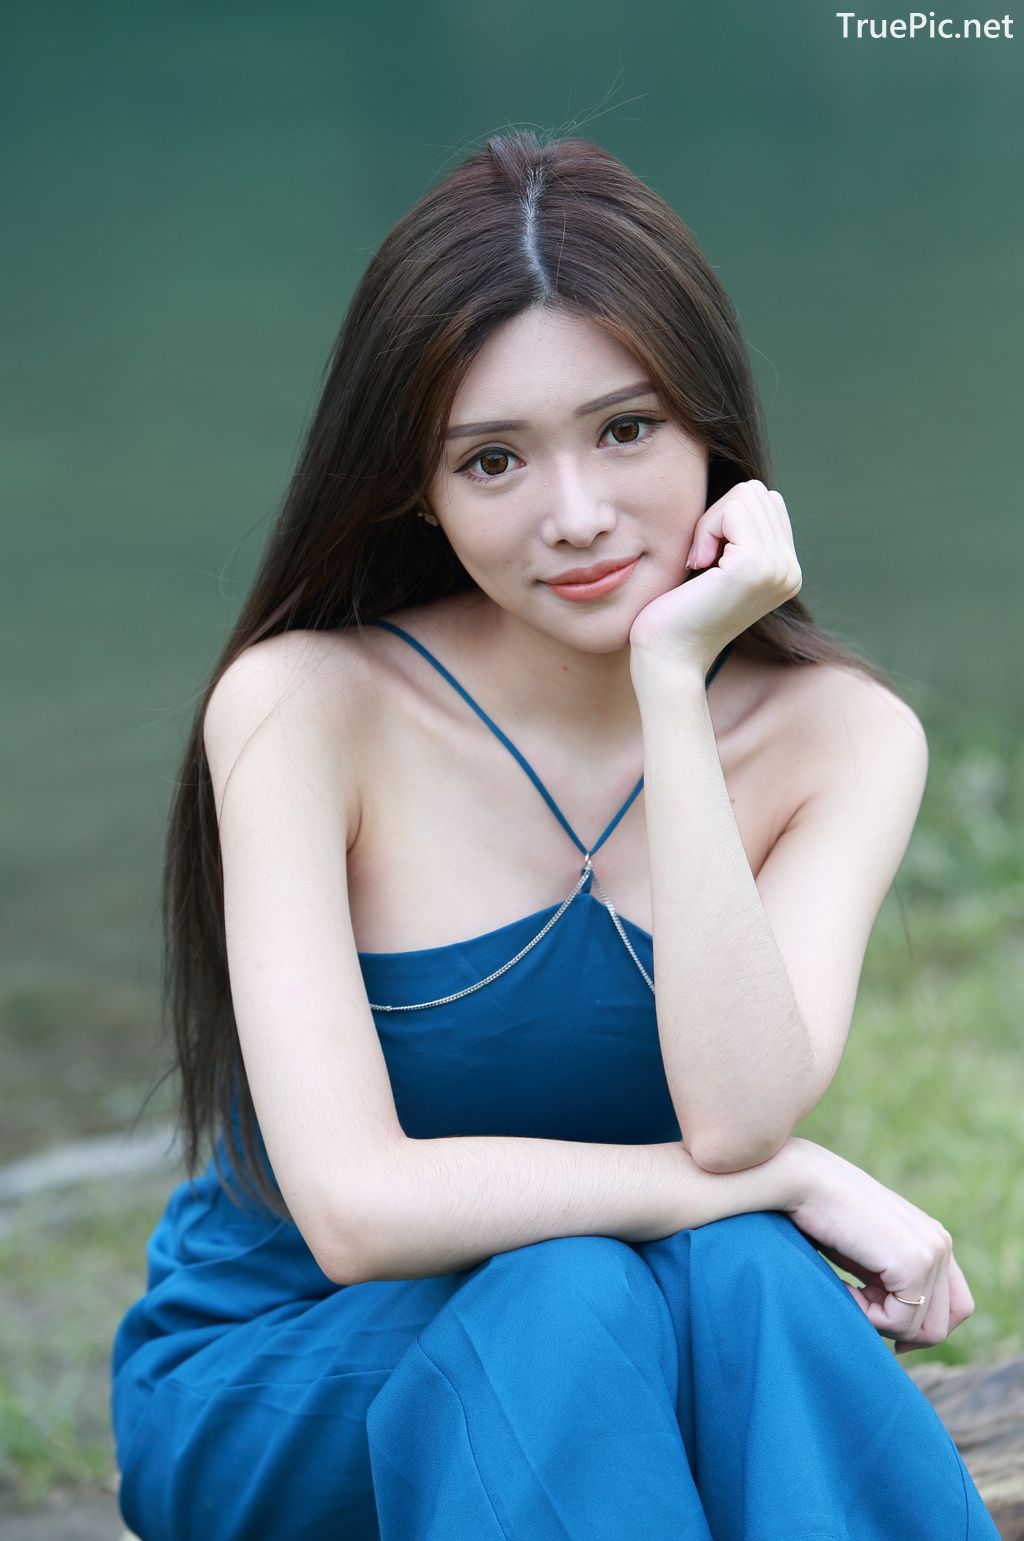 Image-Taiwanese-Pure-Girl-承容-Young-Beautiful-And-Lovely-TruePic.net- Picture-75